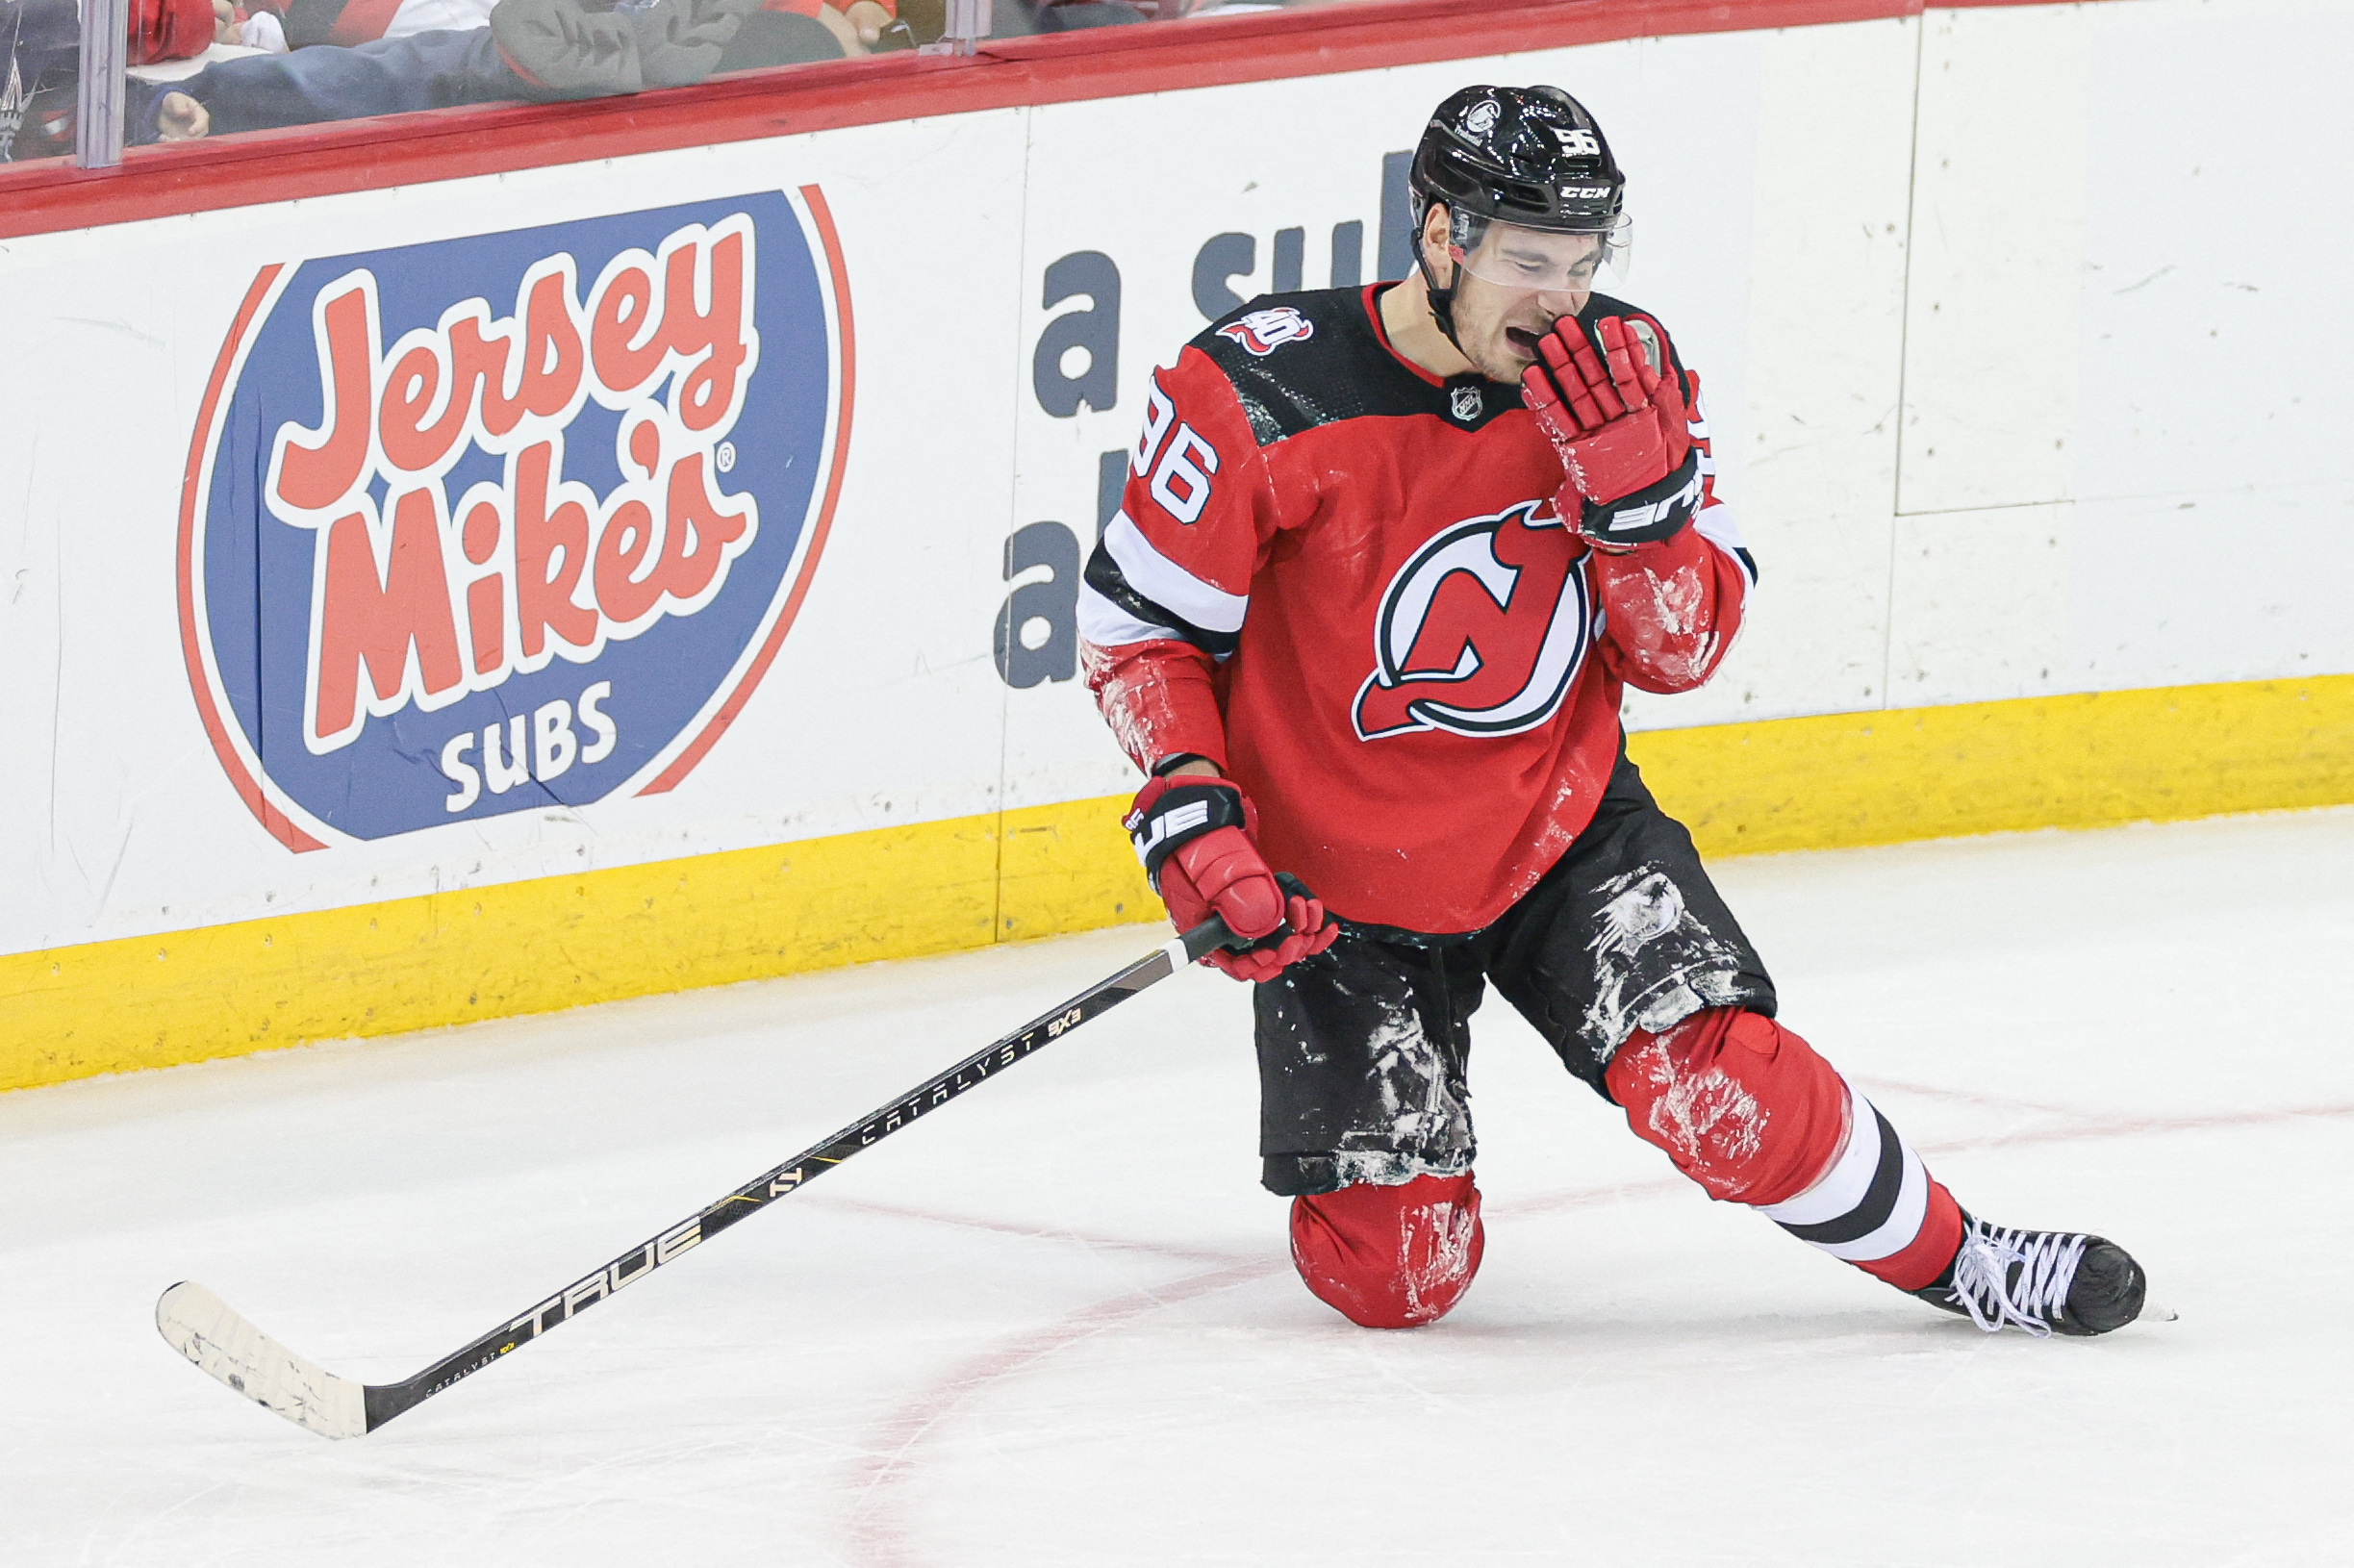 NHL playoffs: New Jersey Devils knock off Rangers